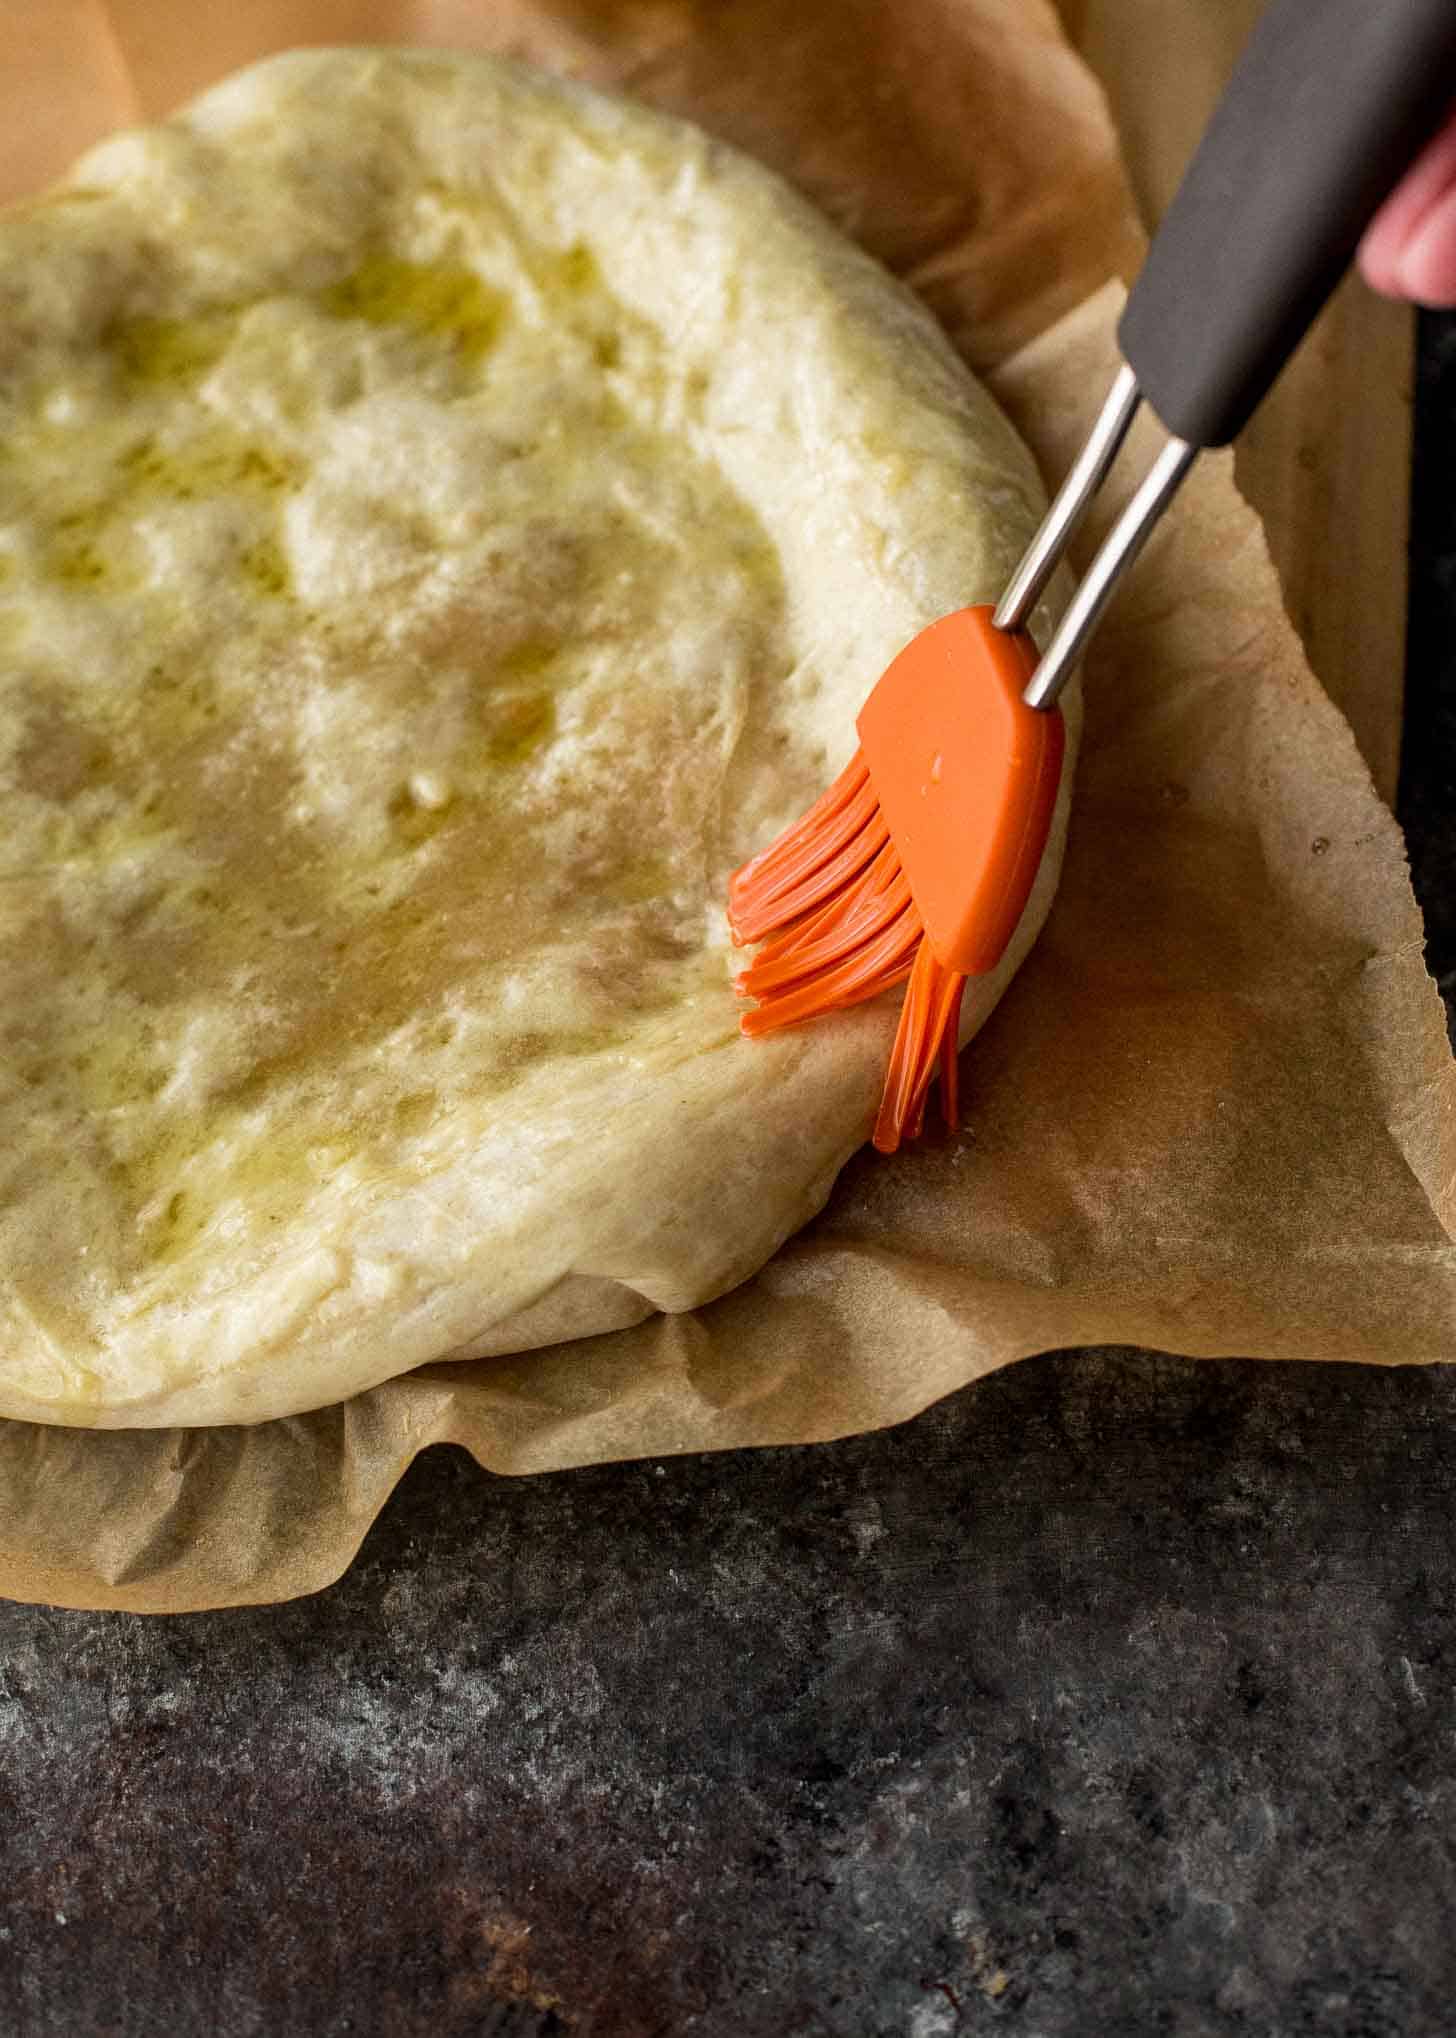 brushing pastry dough with olive oil